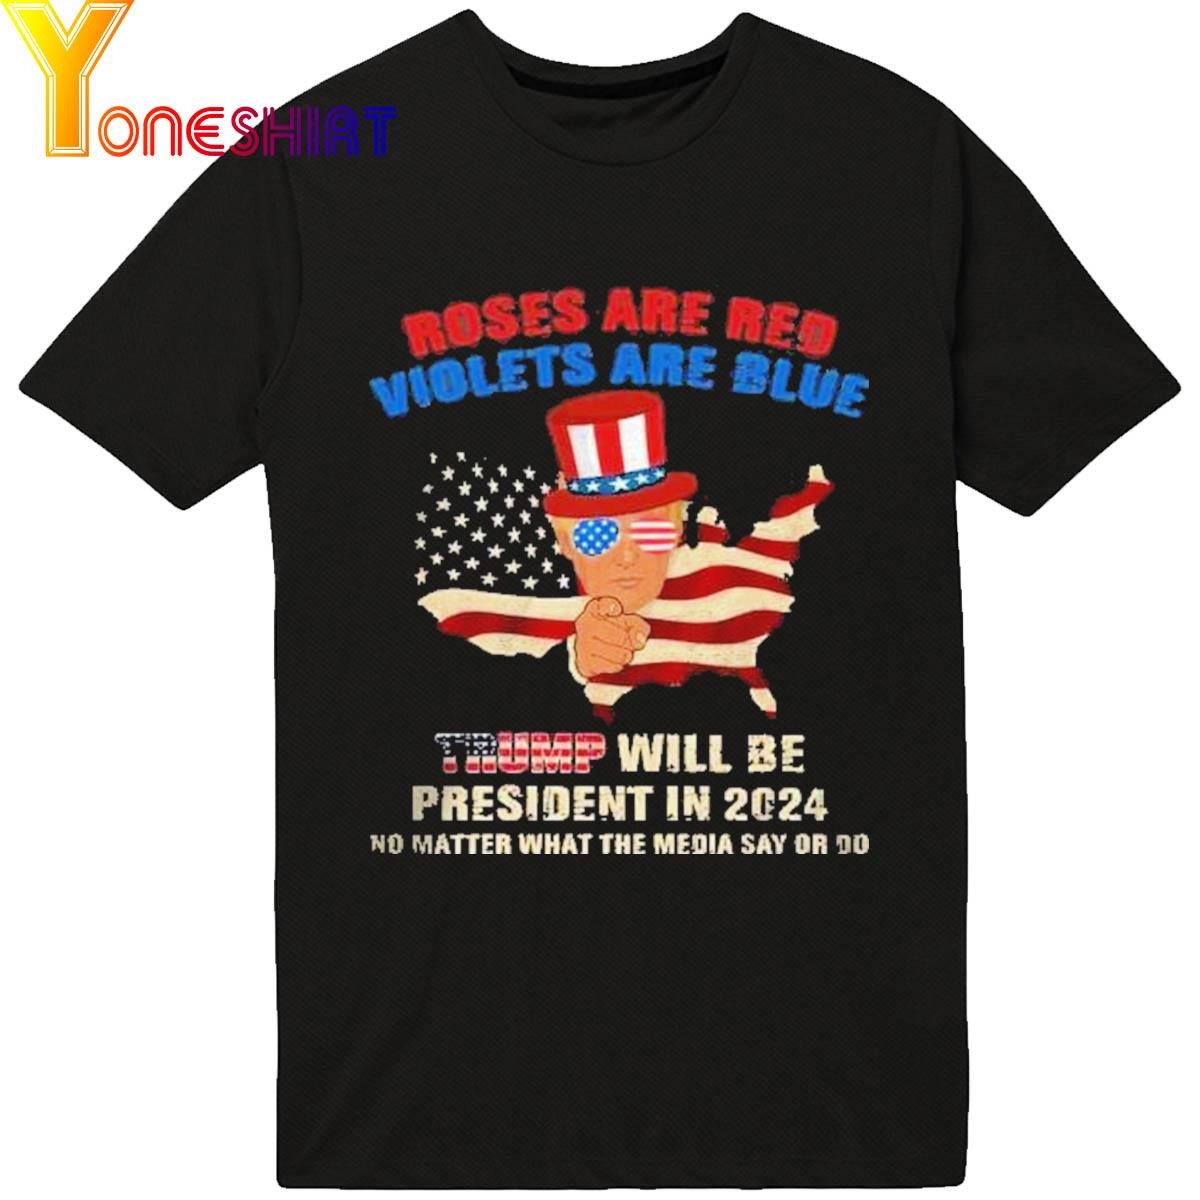 Roses Are Red Violets Are Blue Trump Will Be President In 2024 Shirt